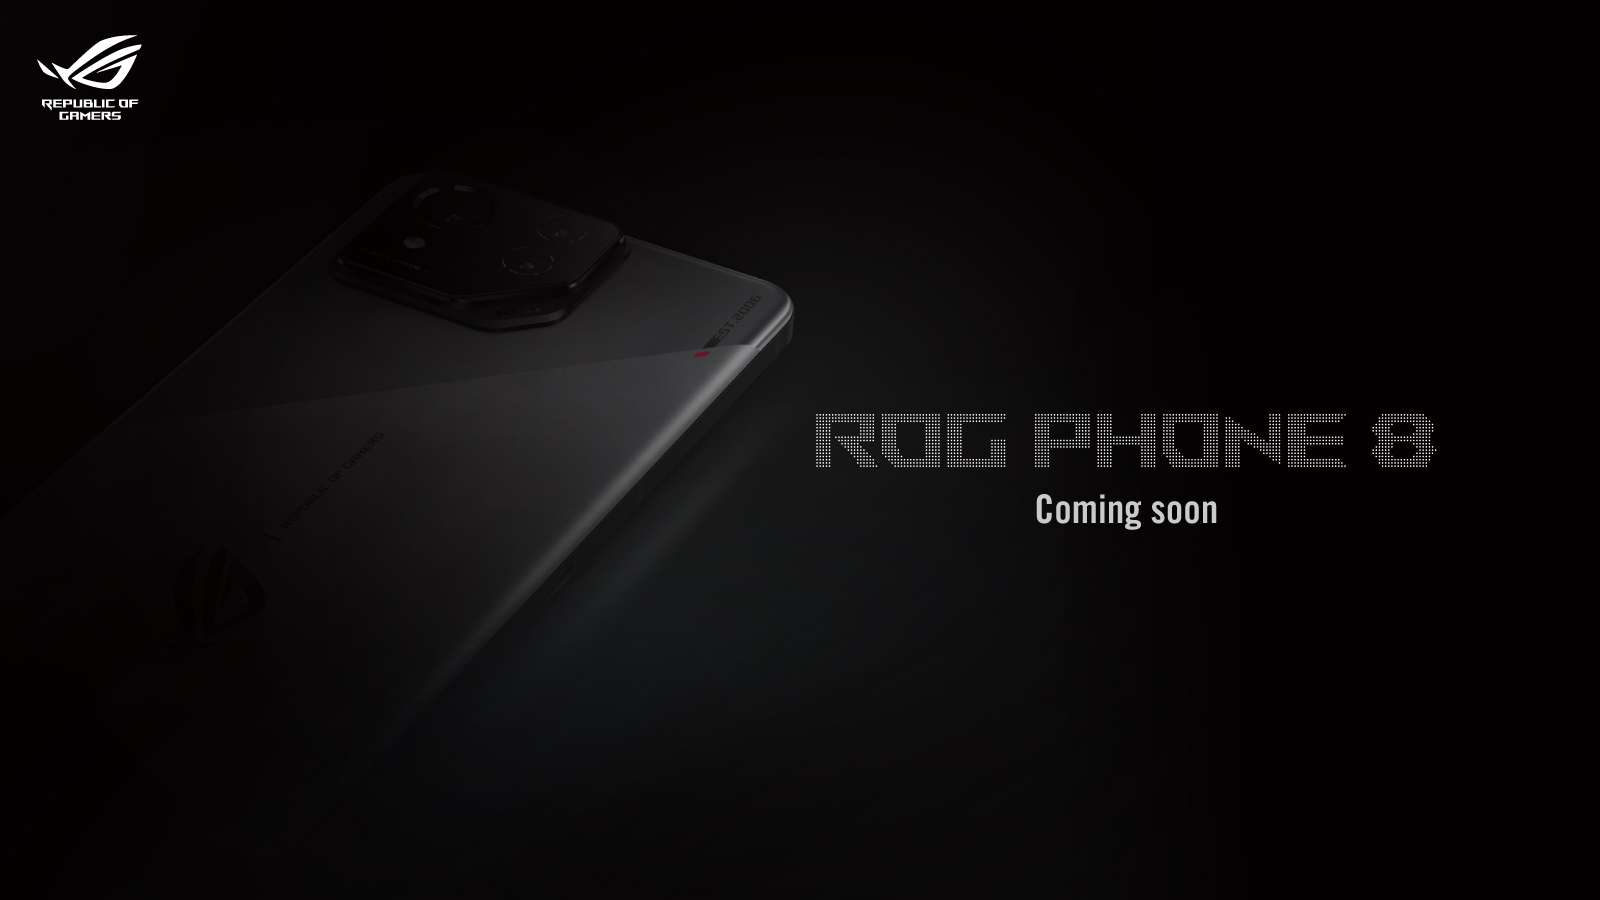 It’s official: The ASUS ROG Phone 8 is coming soon